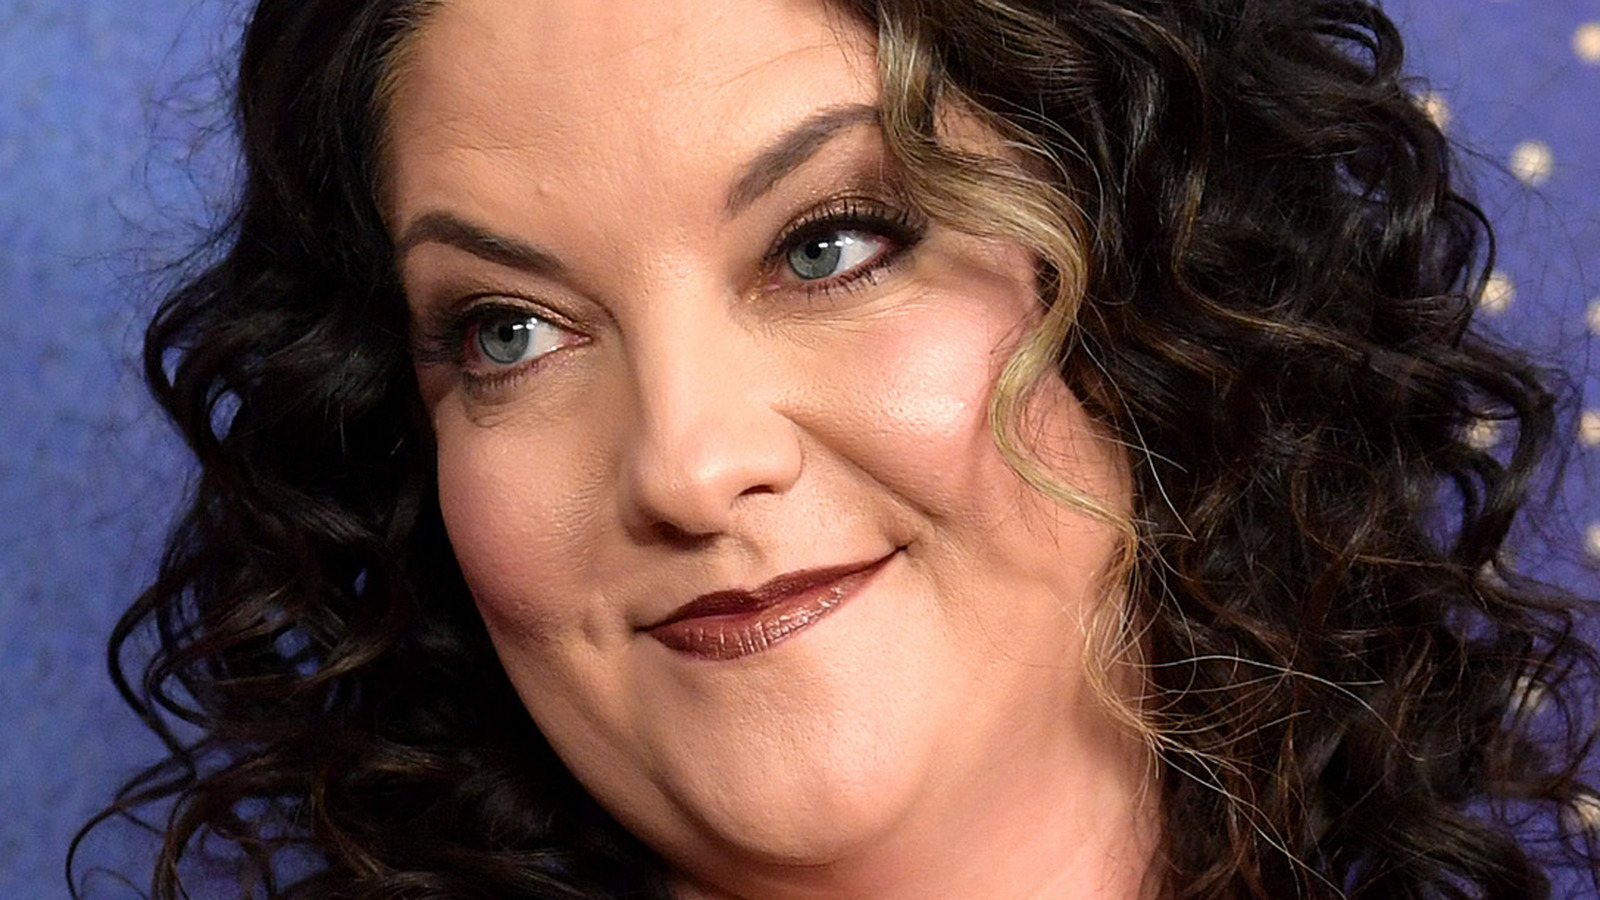 Ashley McBryde The Country Songwriter's Net Worth May Surprise You